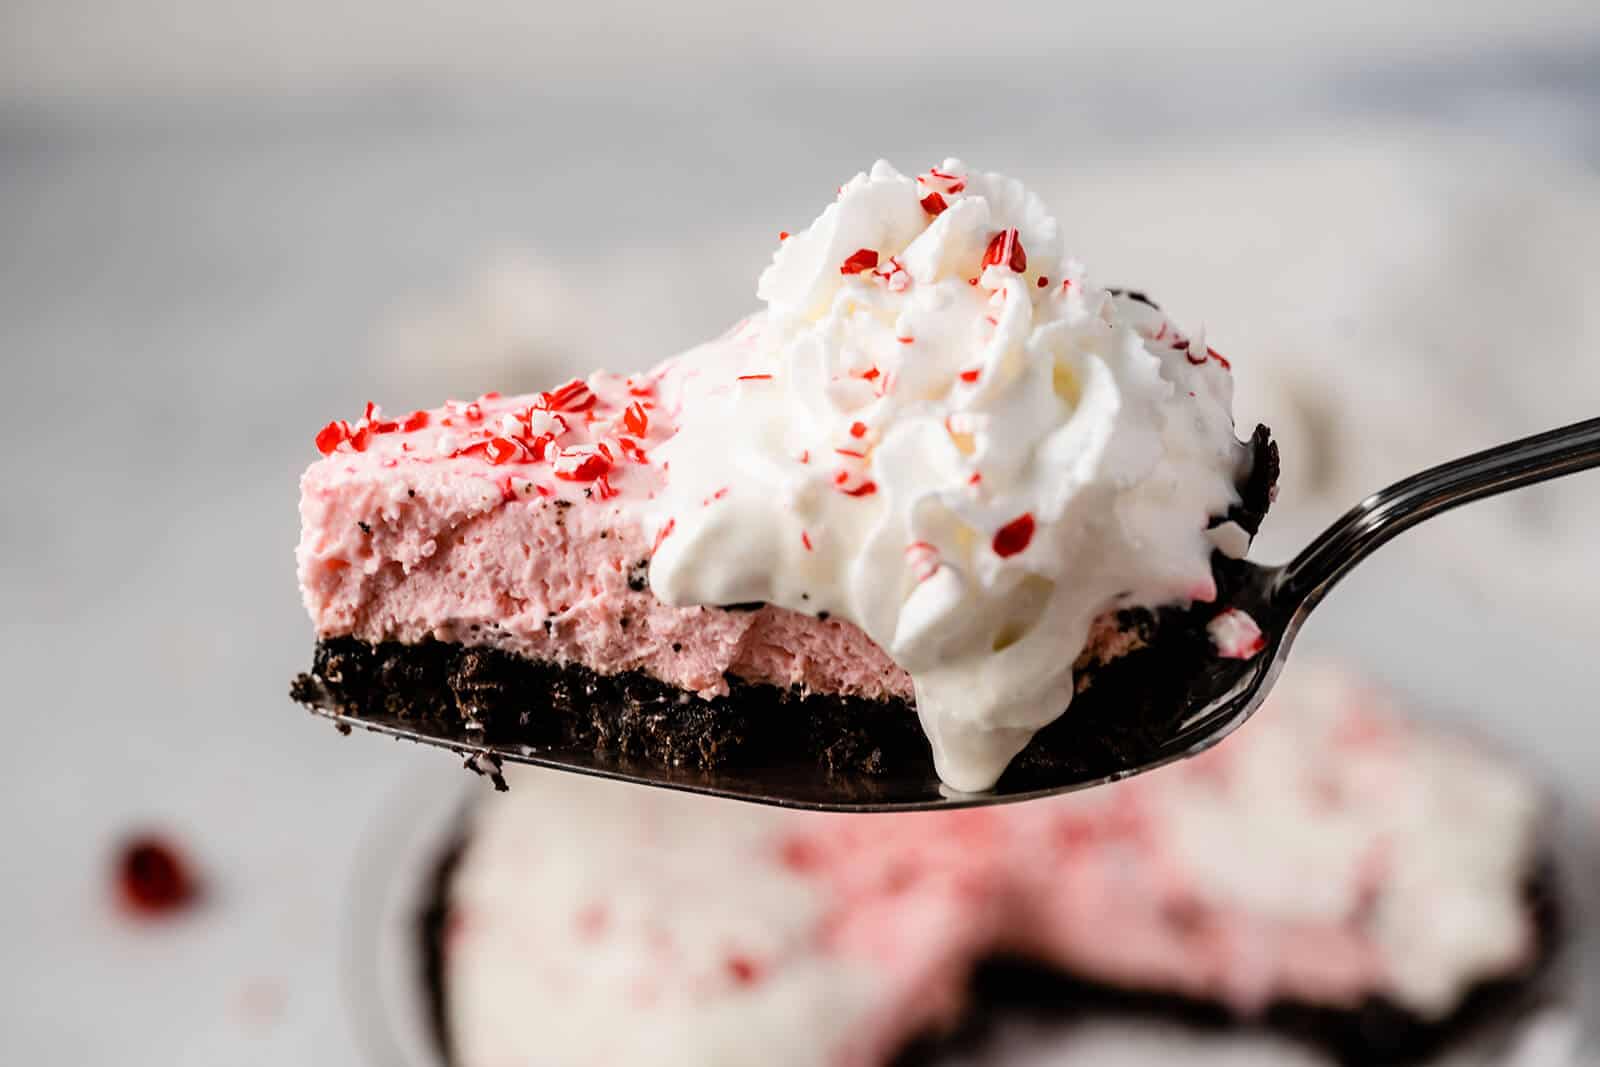 No-Bake Peppermint Pie - This dessert recipe will quickly become a holiday favorite! It combines subtle peppermint flavor with marshmallows, whipped cream and a chocolate sandwich cookie crust. Yum!